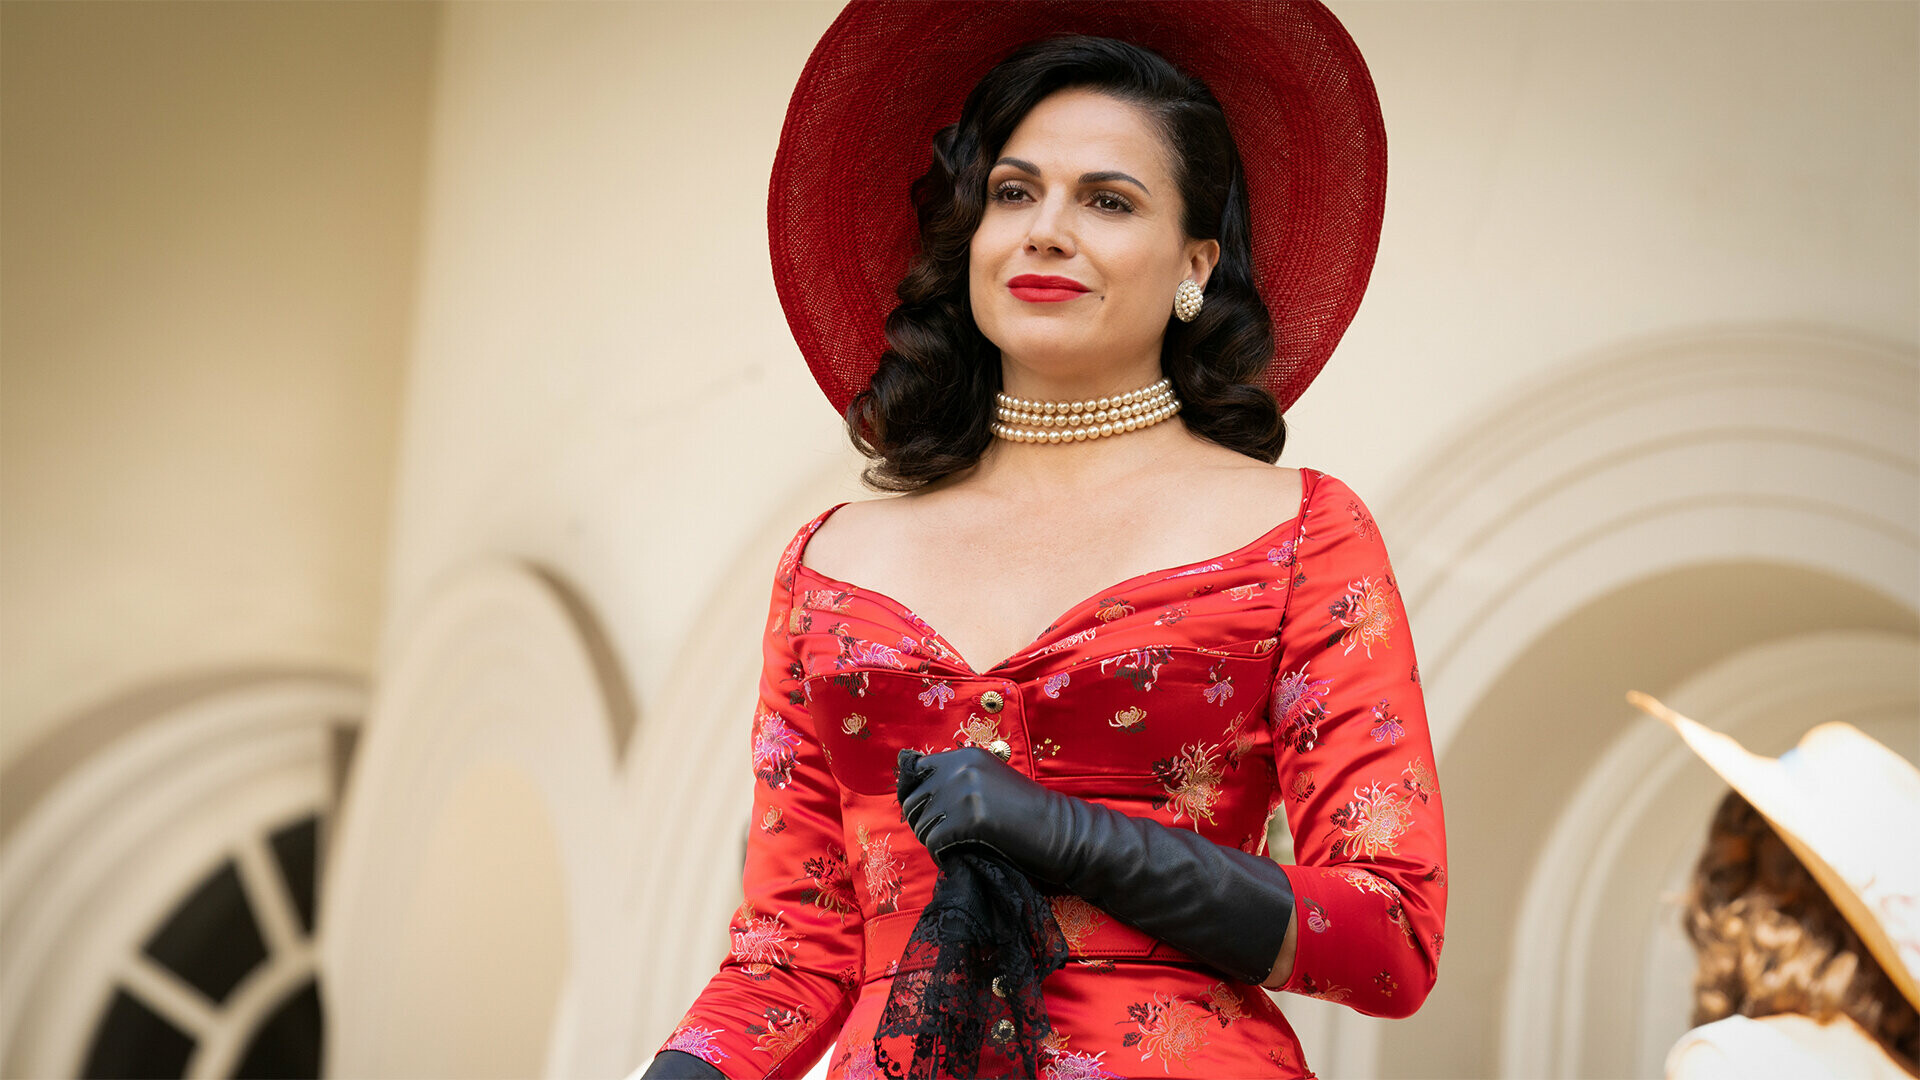 Why Women Kill: Lana Parrilla as Rita Castillo, The president of the local garden club and the gold-digging wife of Carlo. 1920x1080 Full HD Background.